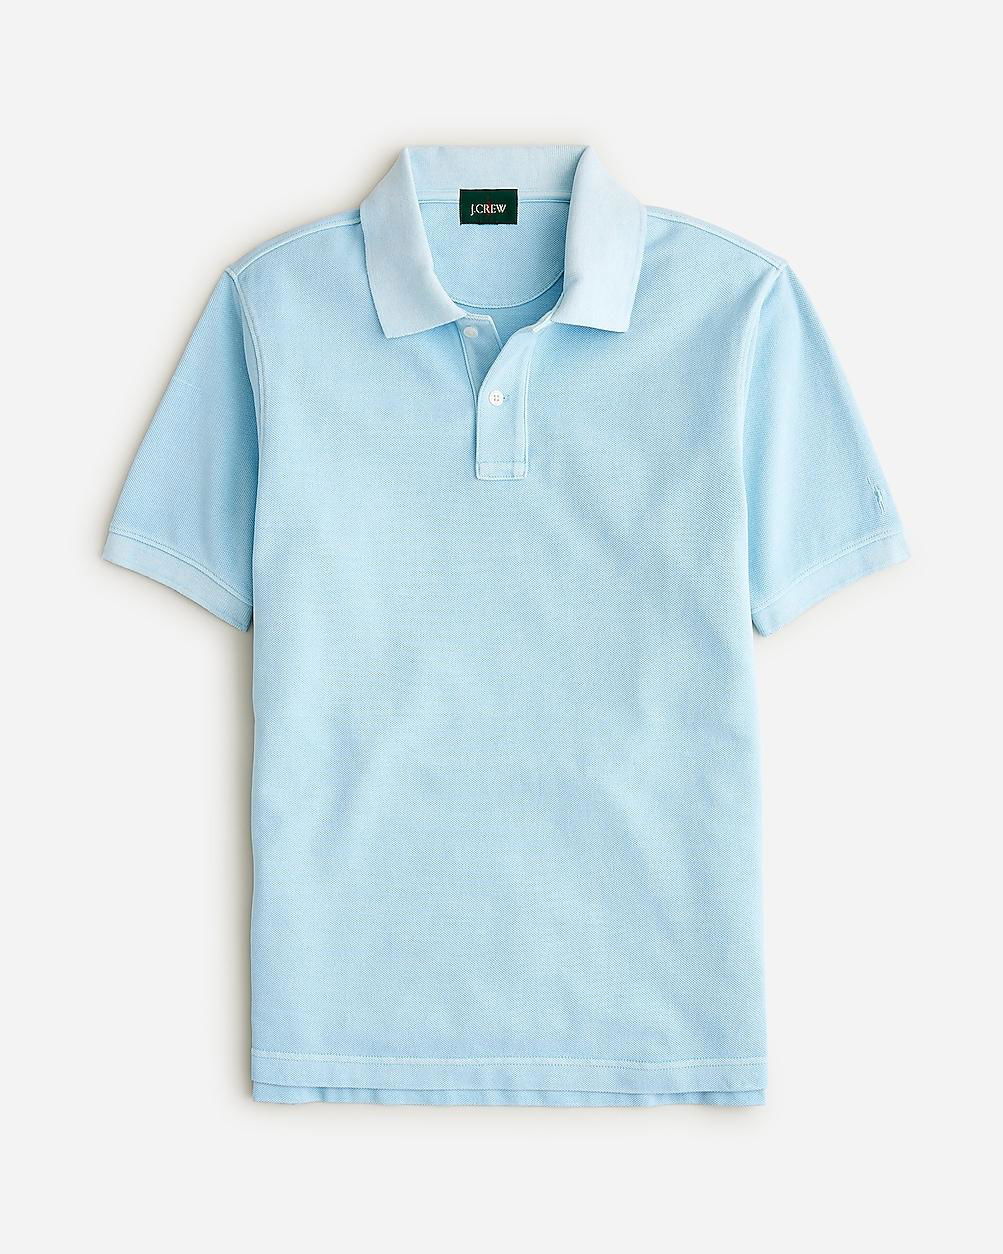 Washed piqué polo shirt by J.CREW